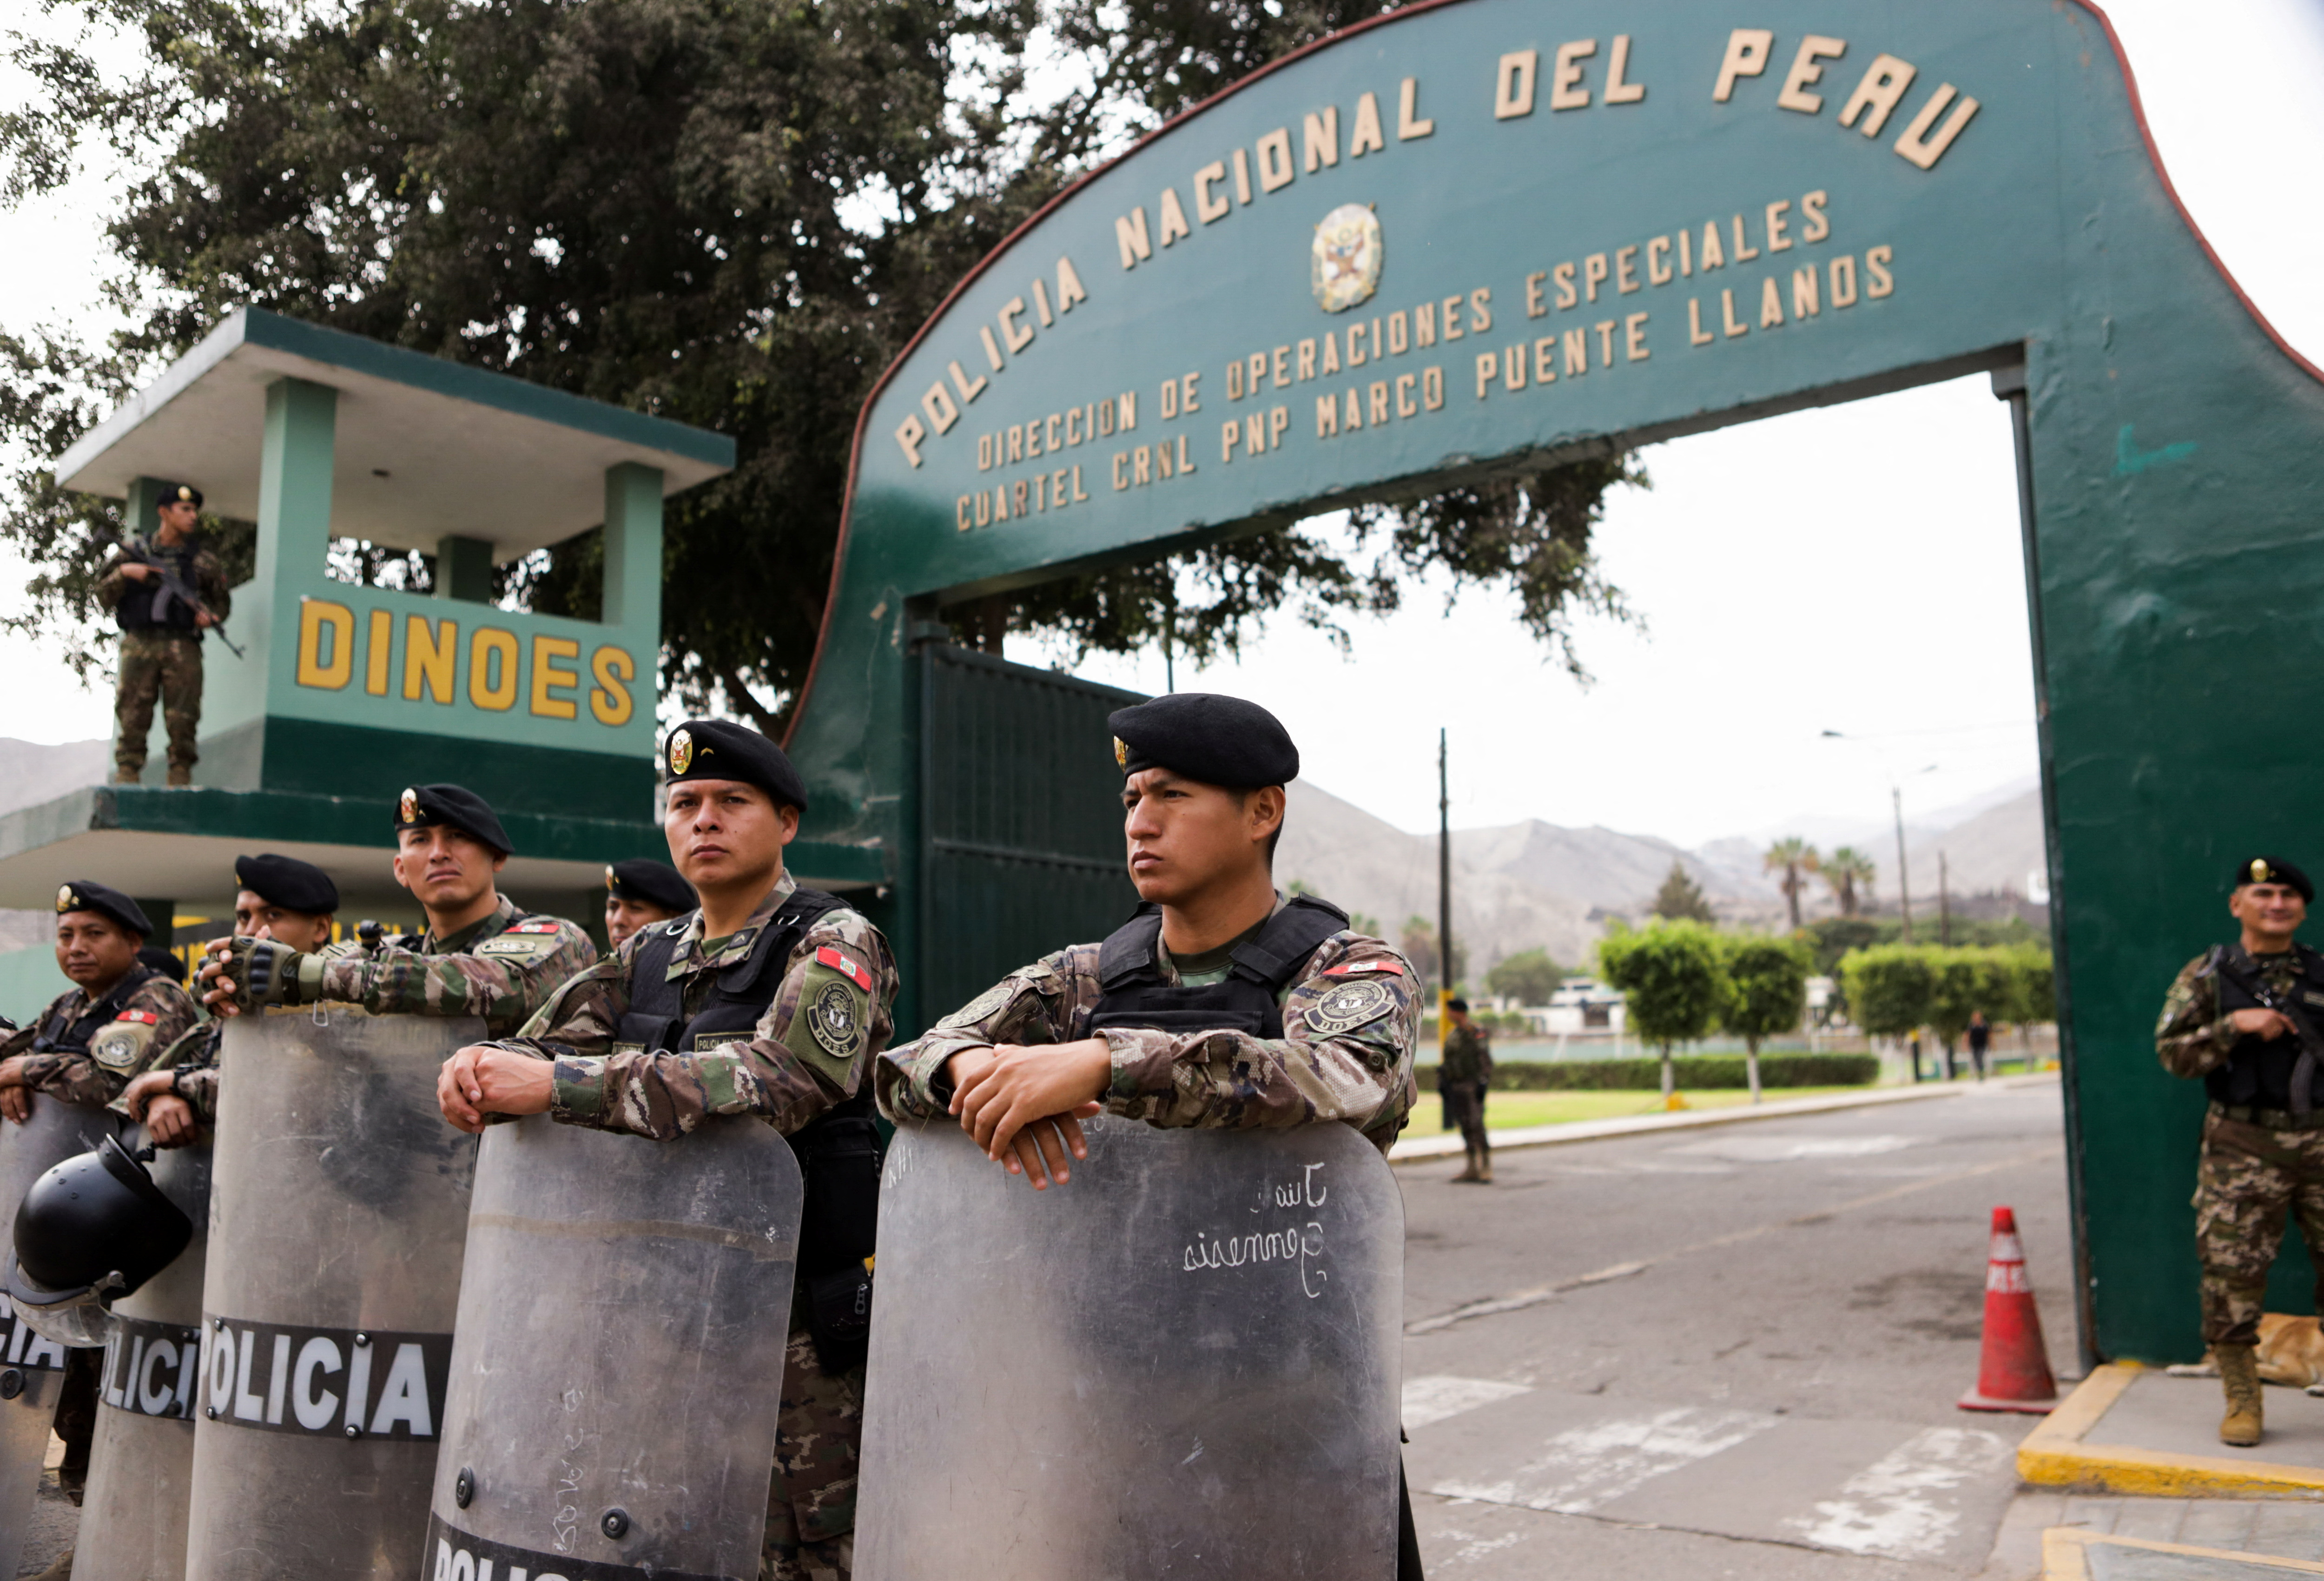 Police stand guard outside the facilities of the Directorate of Special Operations (DIROES) where Peru's former President Alejandro Toledo is expected to arrive following his extradition to Peru, in Lima, Peru April 23, 2023. REUTERS/Liz Tasa